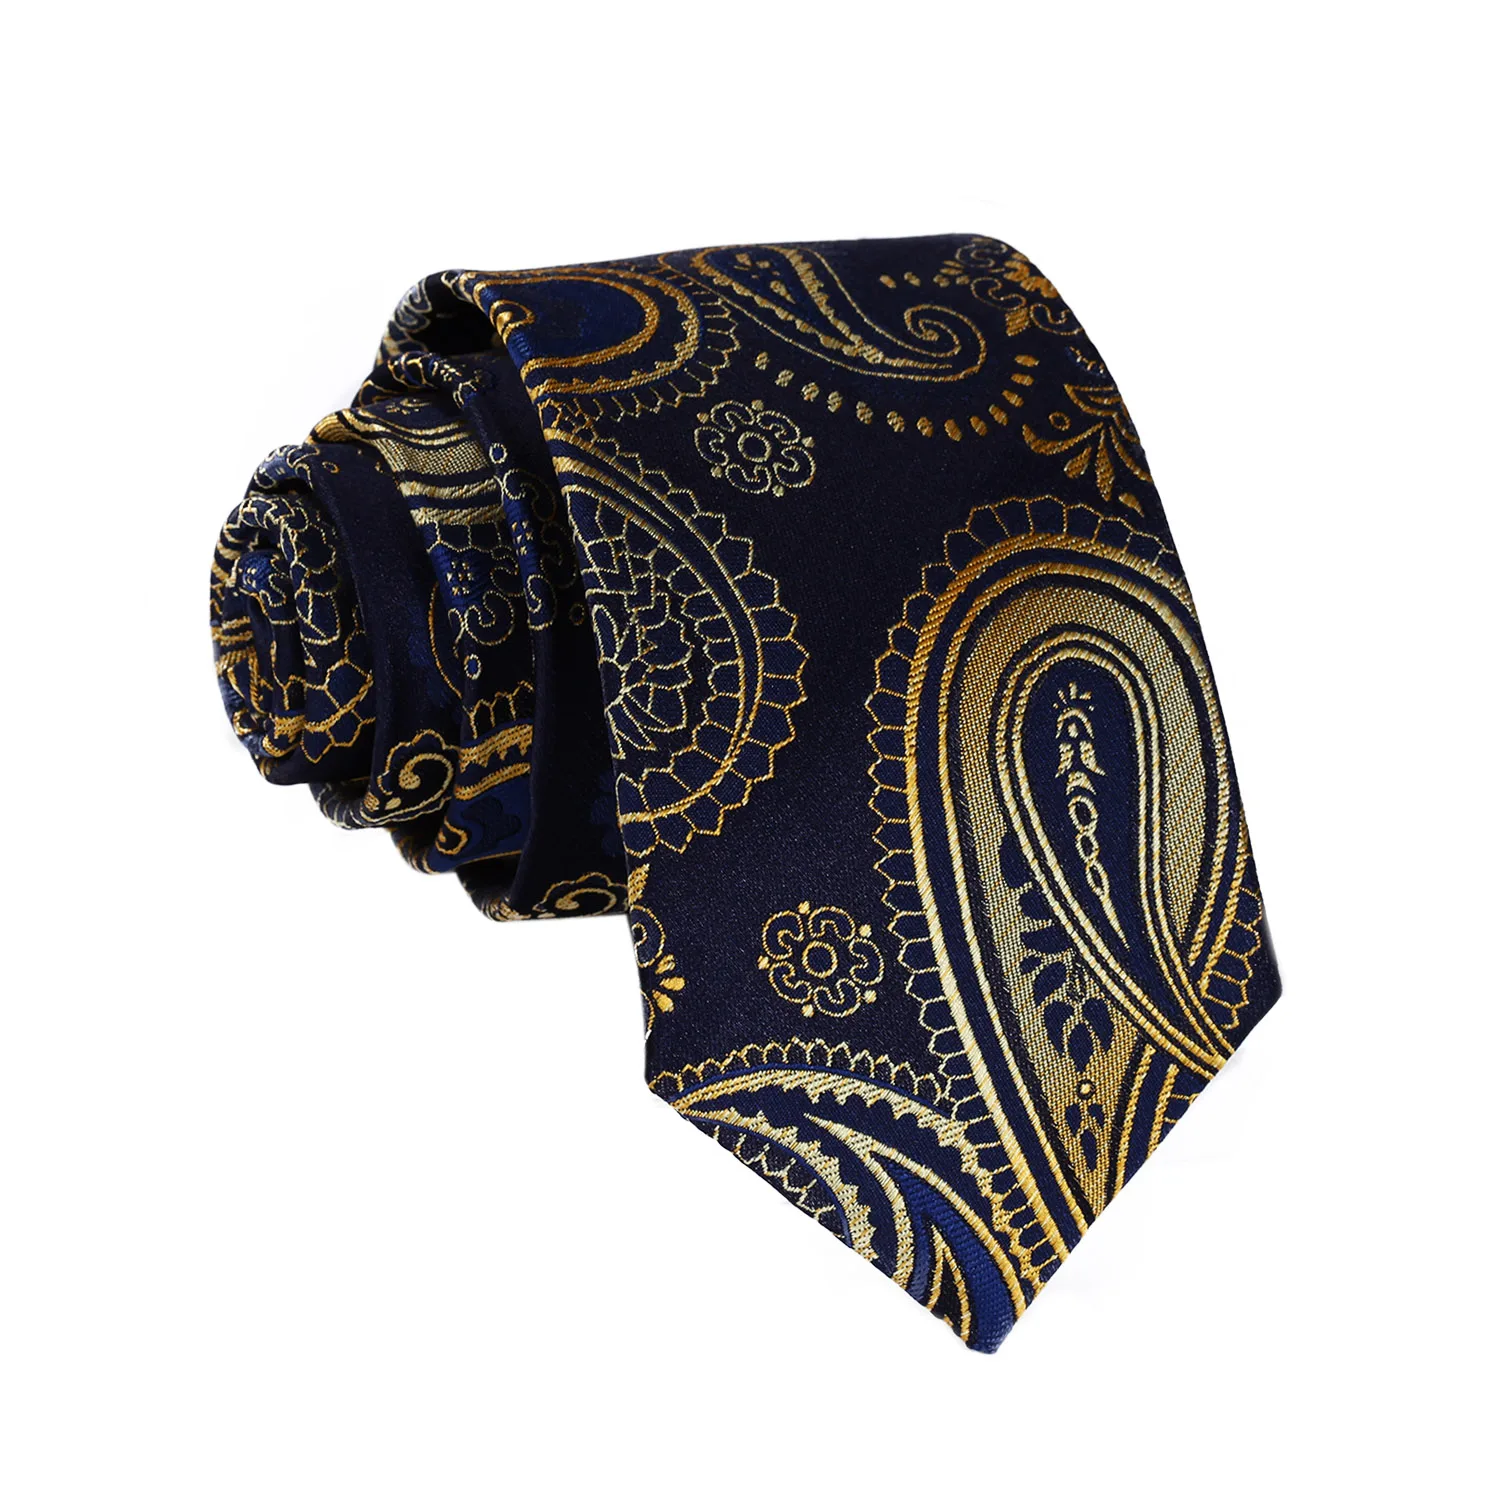  Party Wedding Classic Pocket Square Tie TP921V7S Navy Blue Gold Paisley 2.75